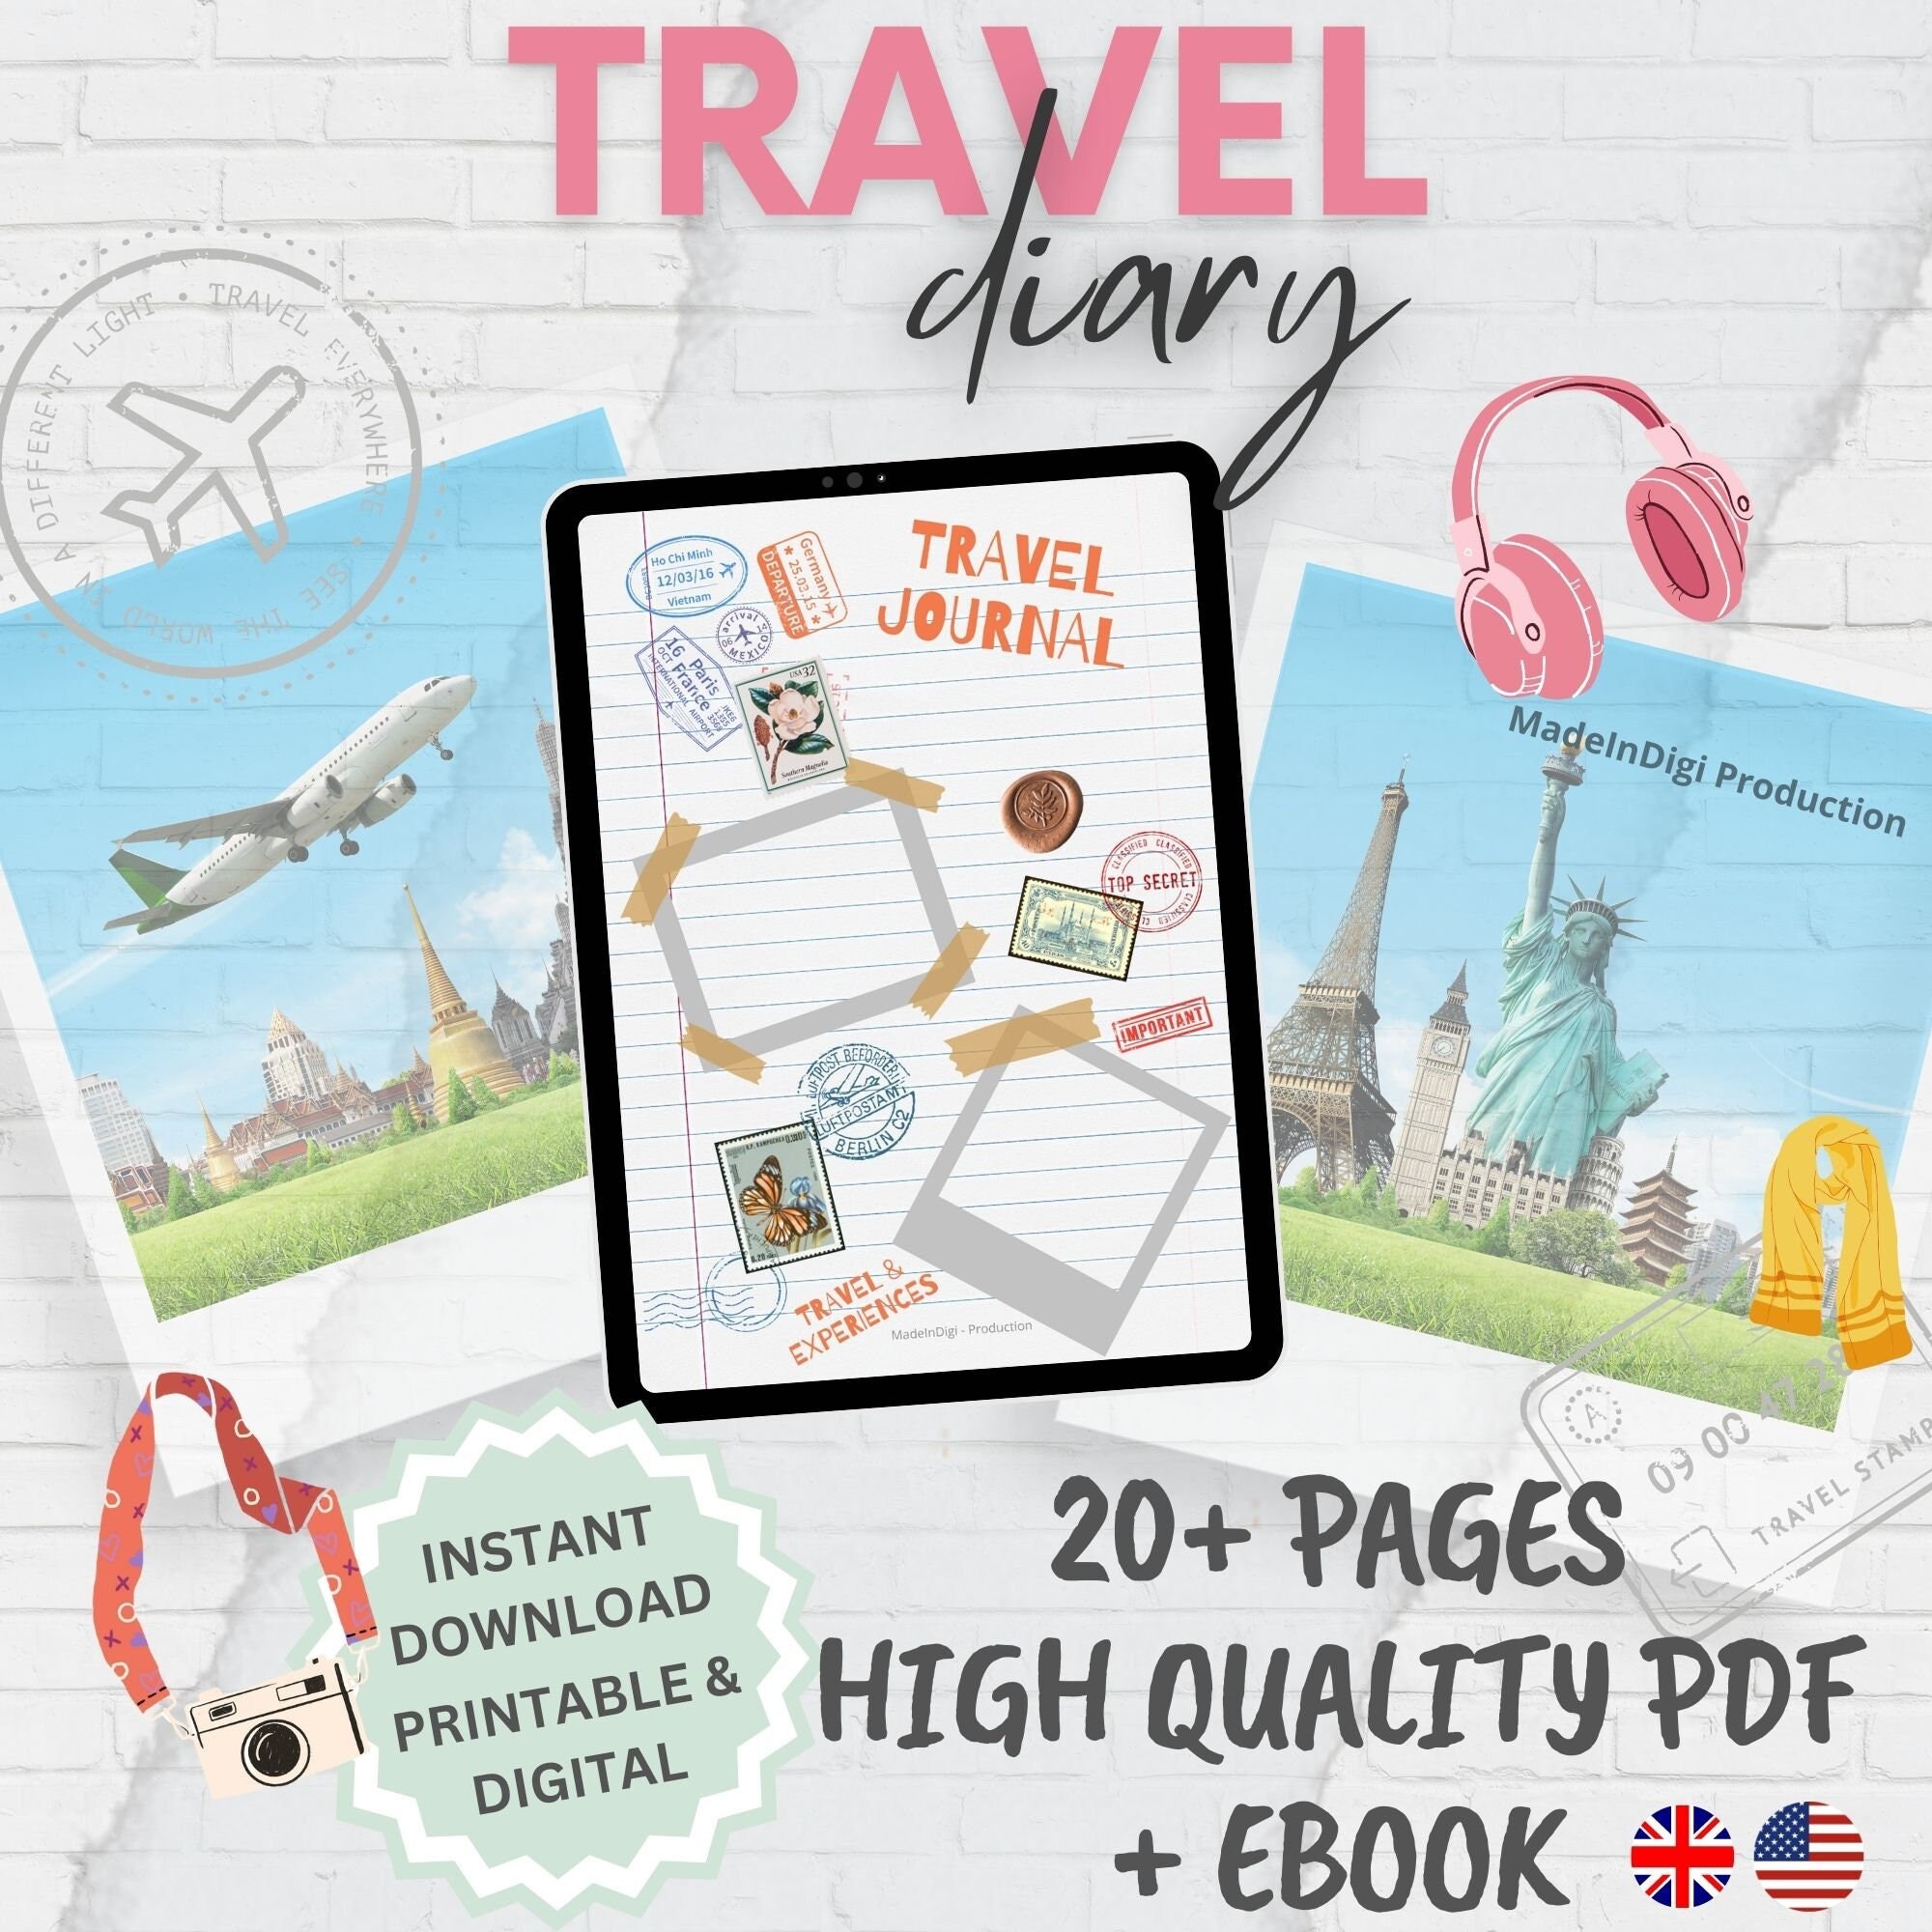 Travel Journal for Couples & Families, Travel Scrapbook, Holiday